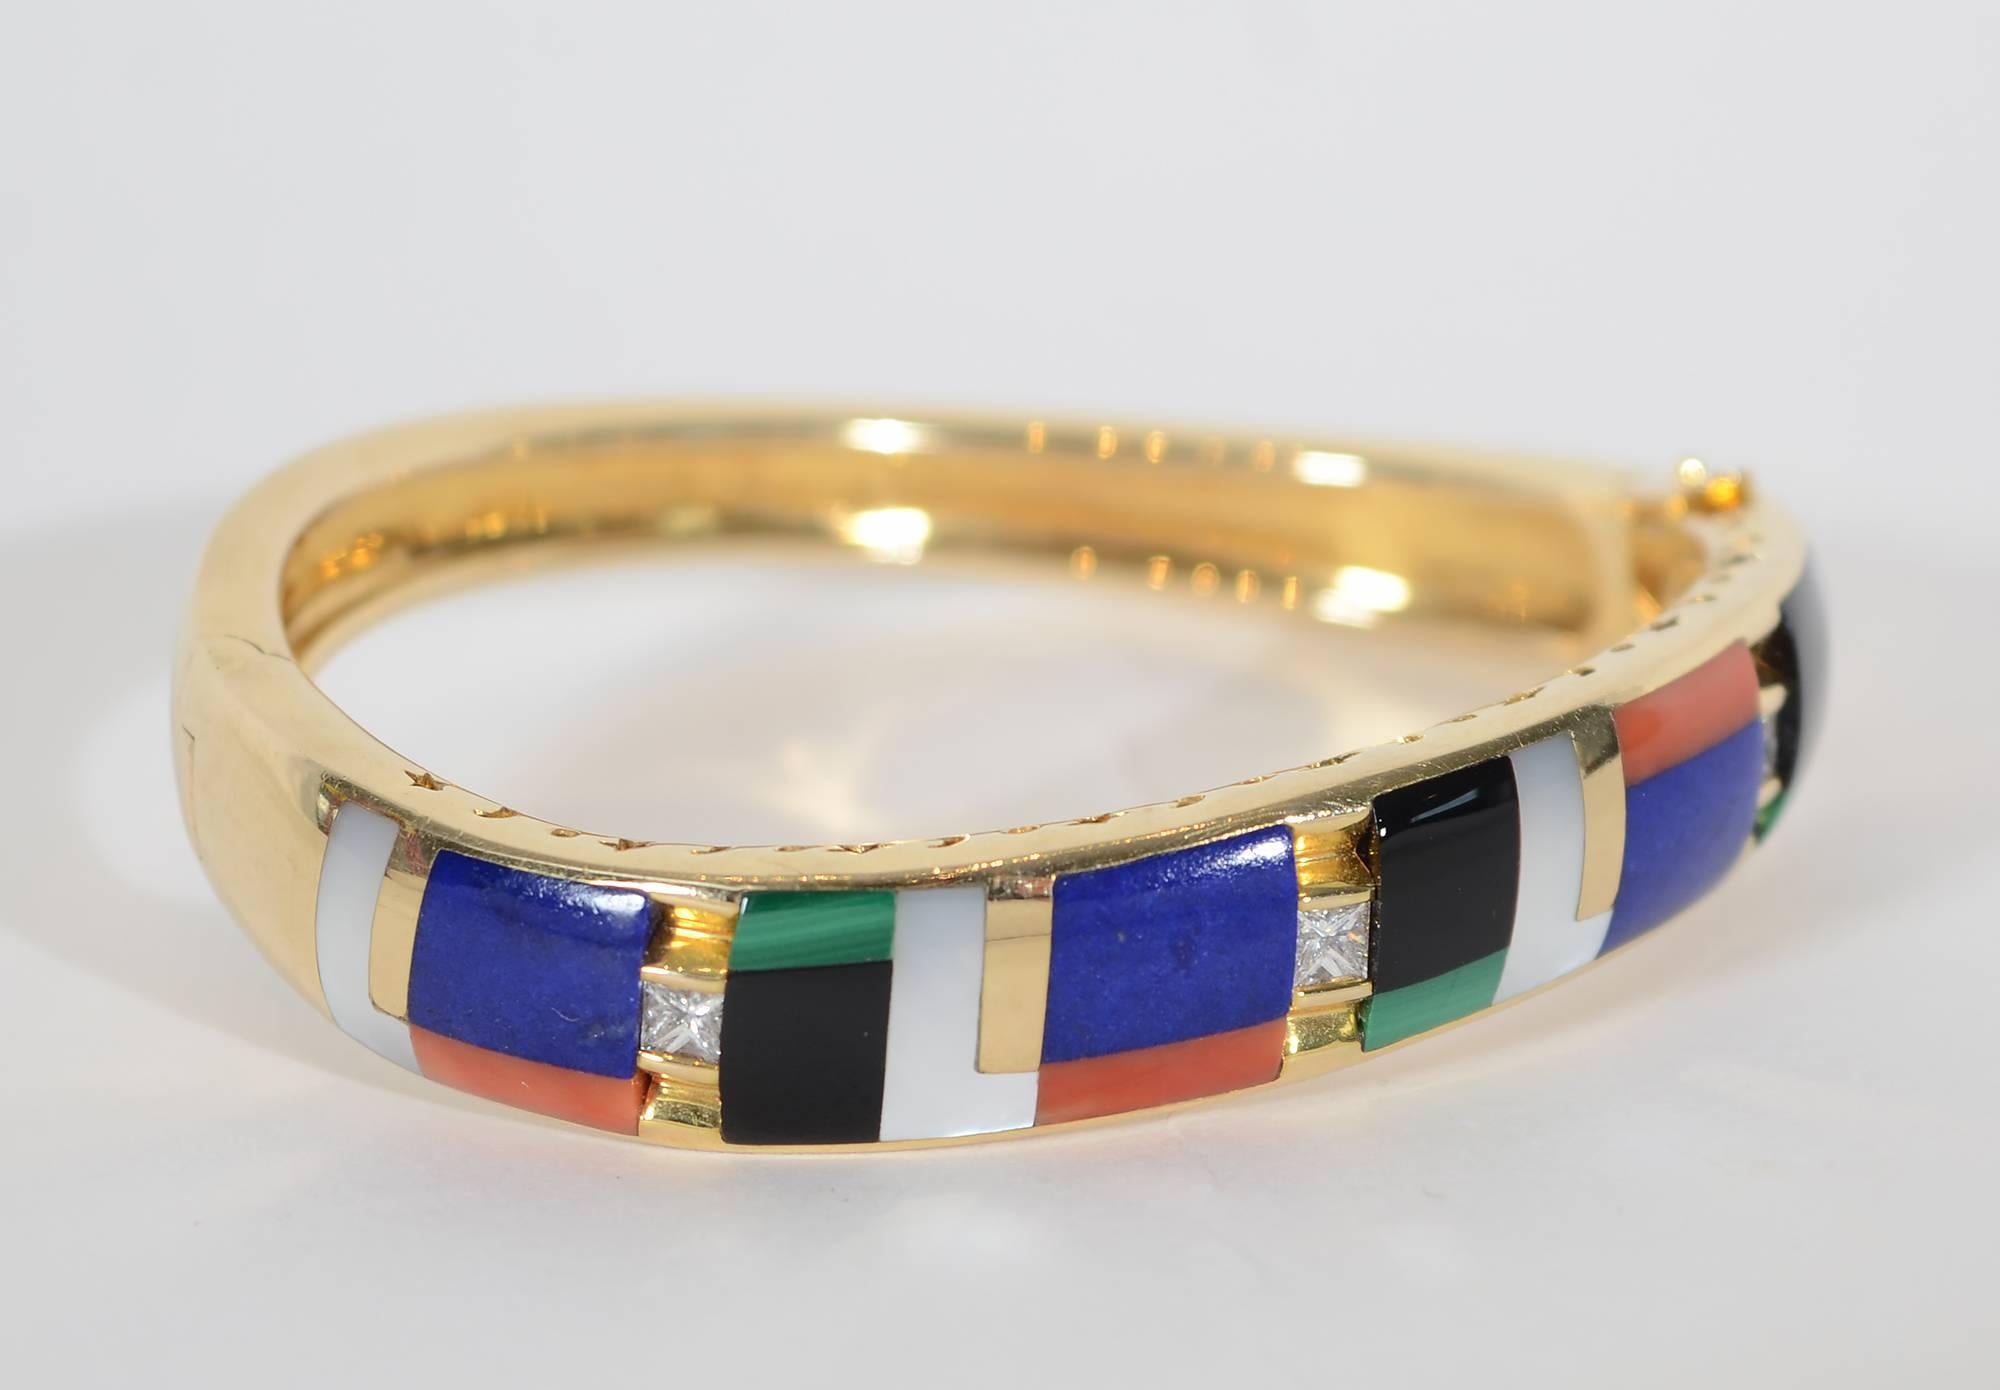 Squares and rectangles of a variety of stones are set on an angle in this bracelet by Asch Grossbardt. The stones include: black onyx; lapis lazuli; mother of pearl; malachite and coral. Three channel set diamonds are interspersed with the colored